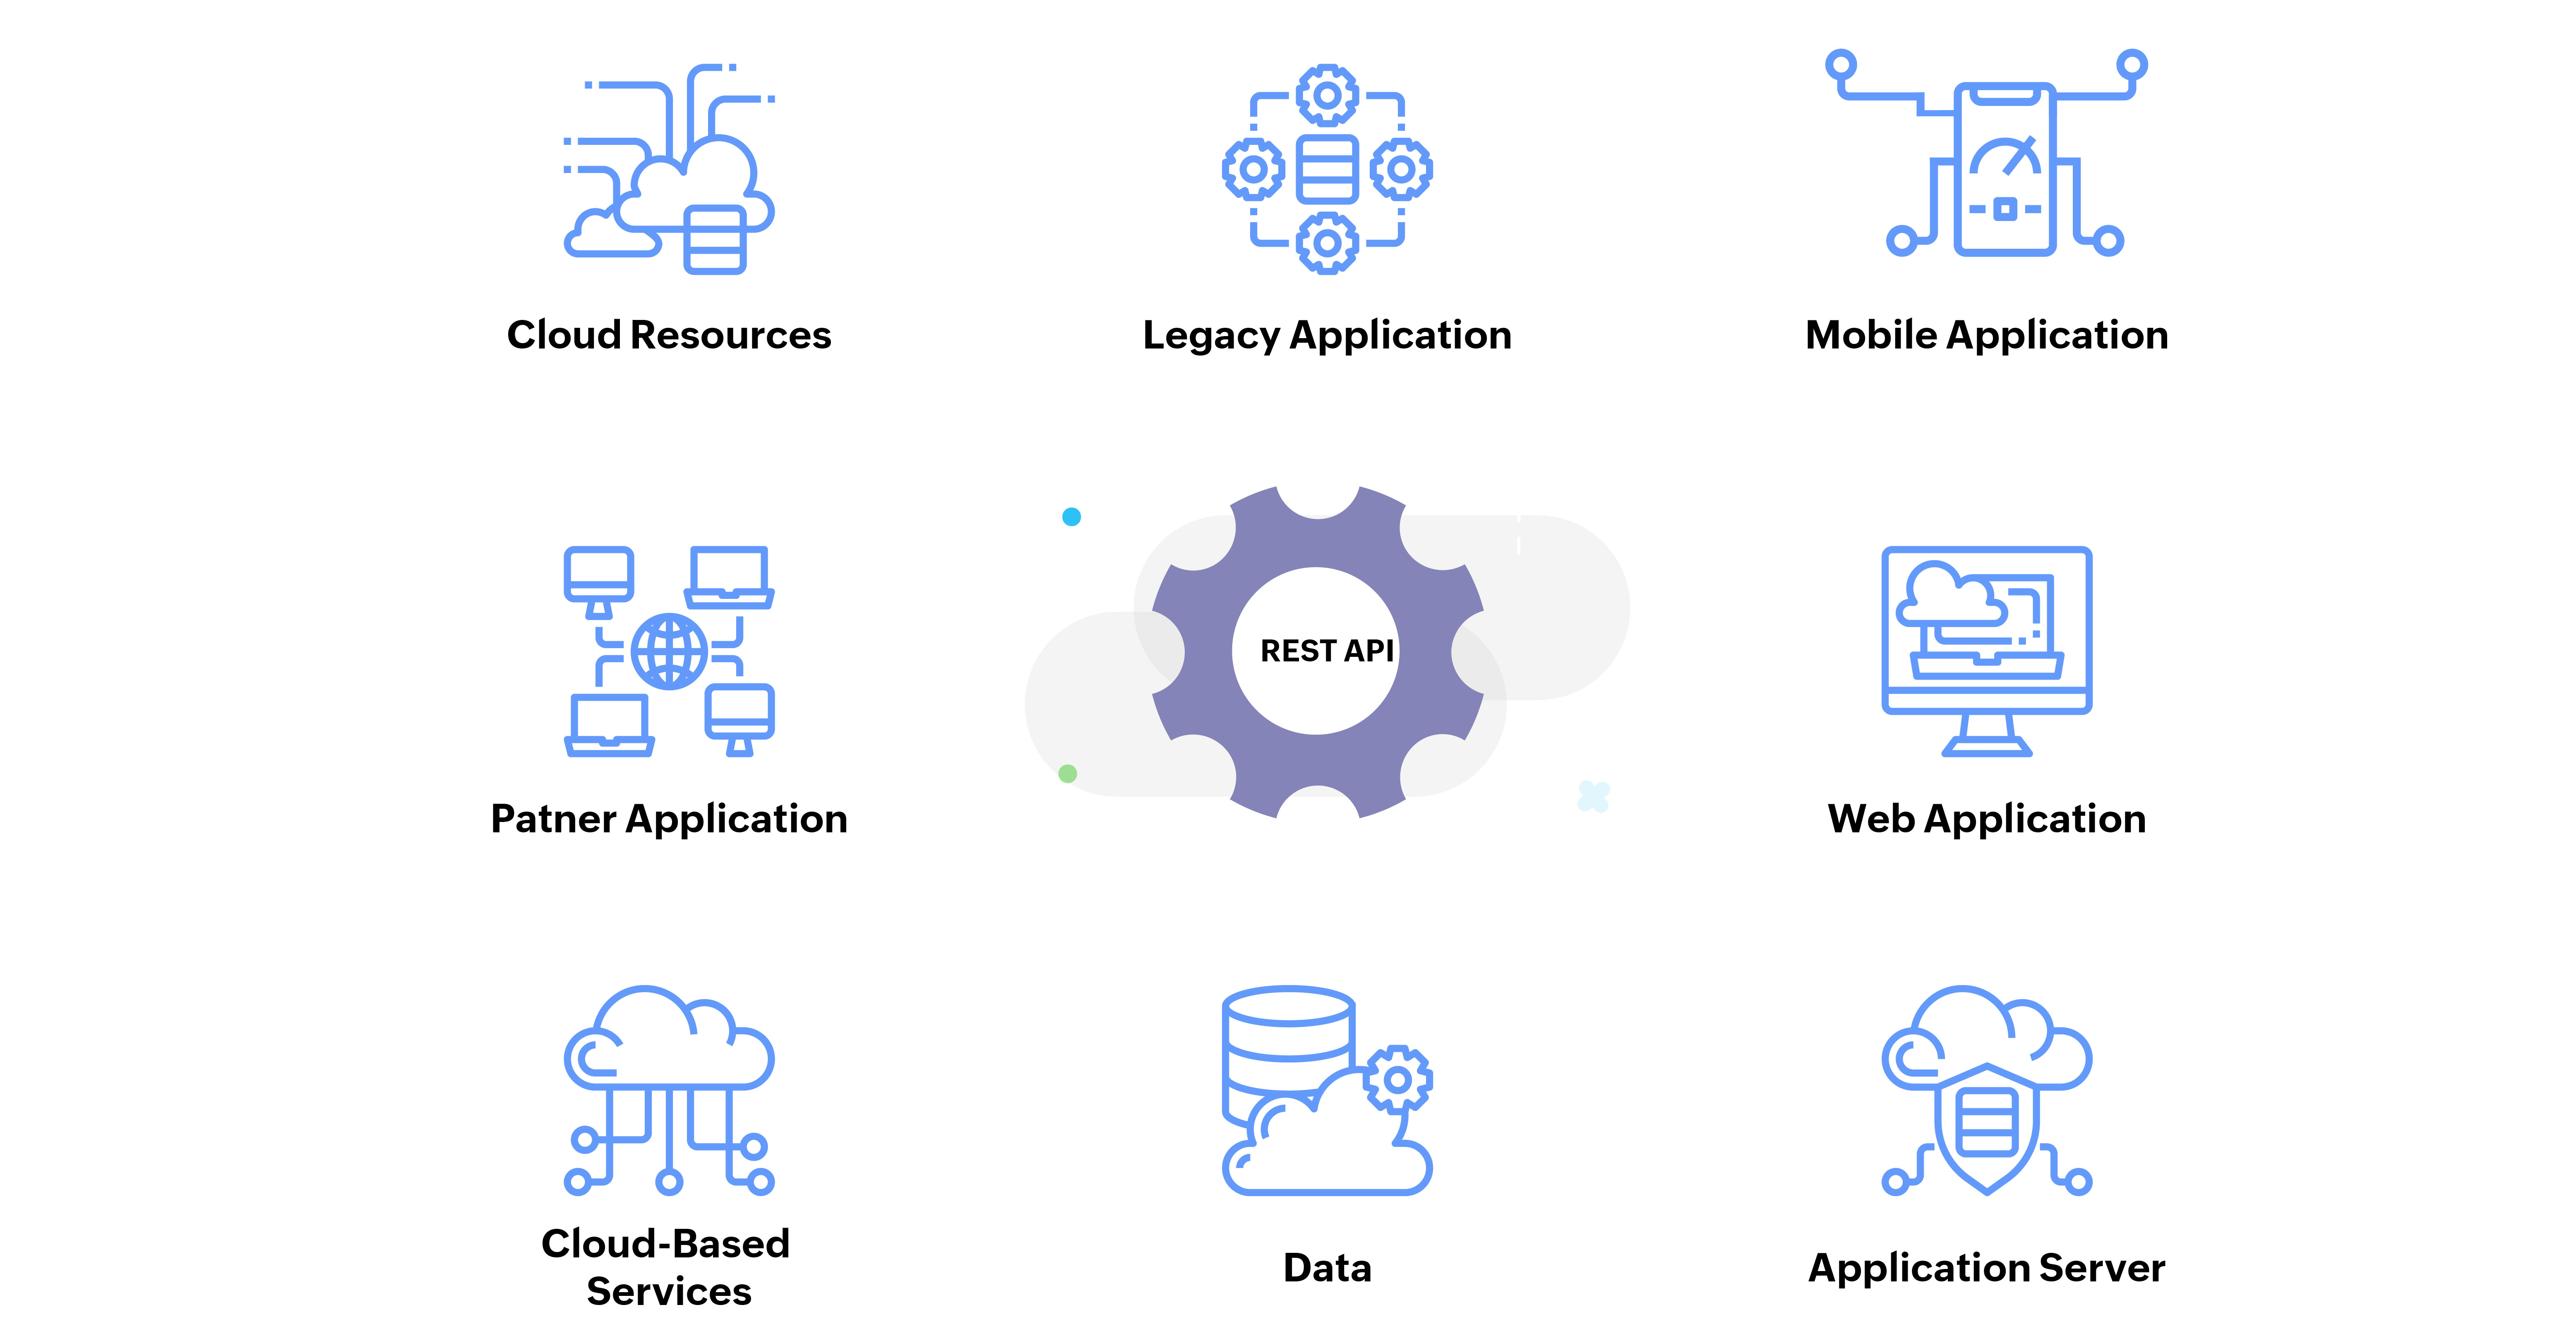 "an illustration showing the various ways to customise and deliver an application using APIs, including partner application, mobile application, web application, and legacy application"